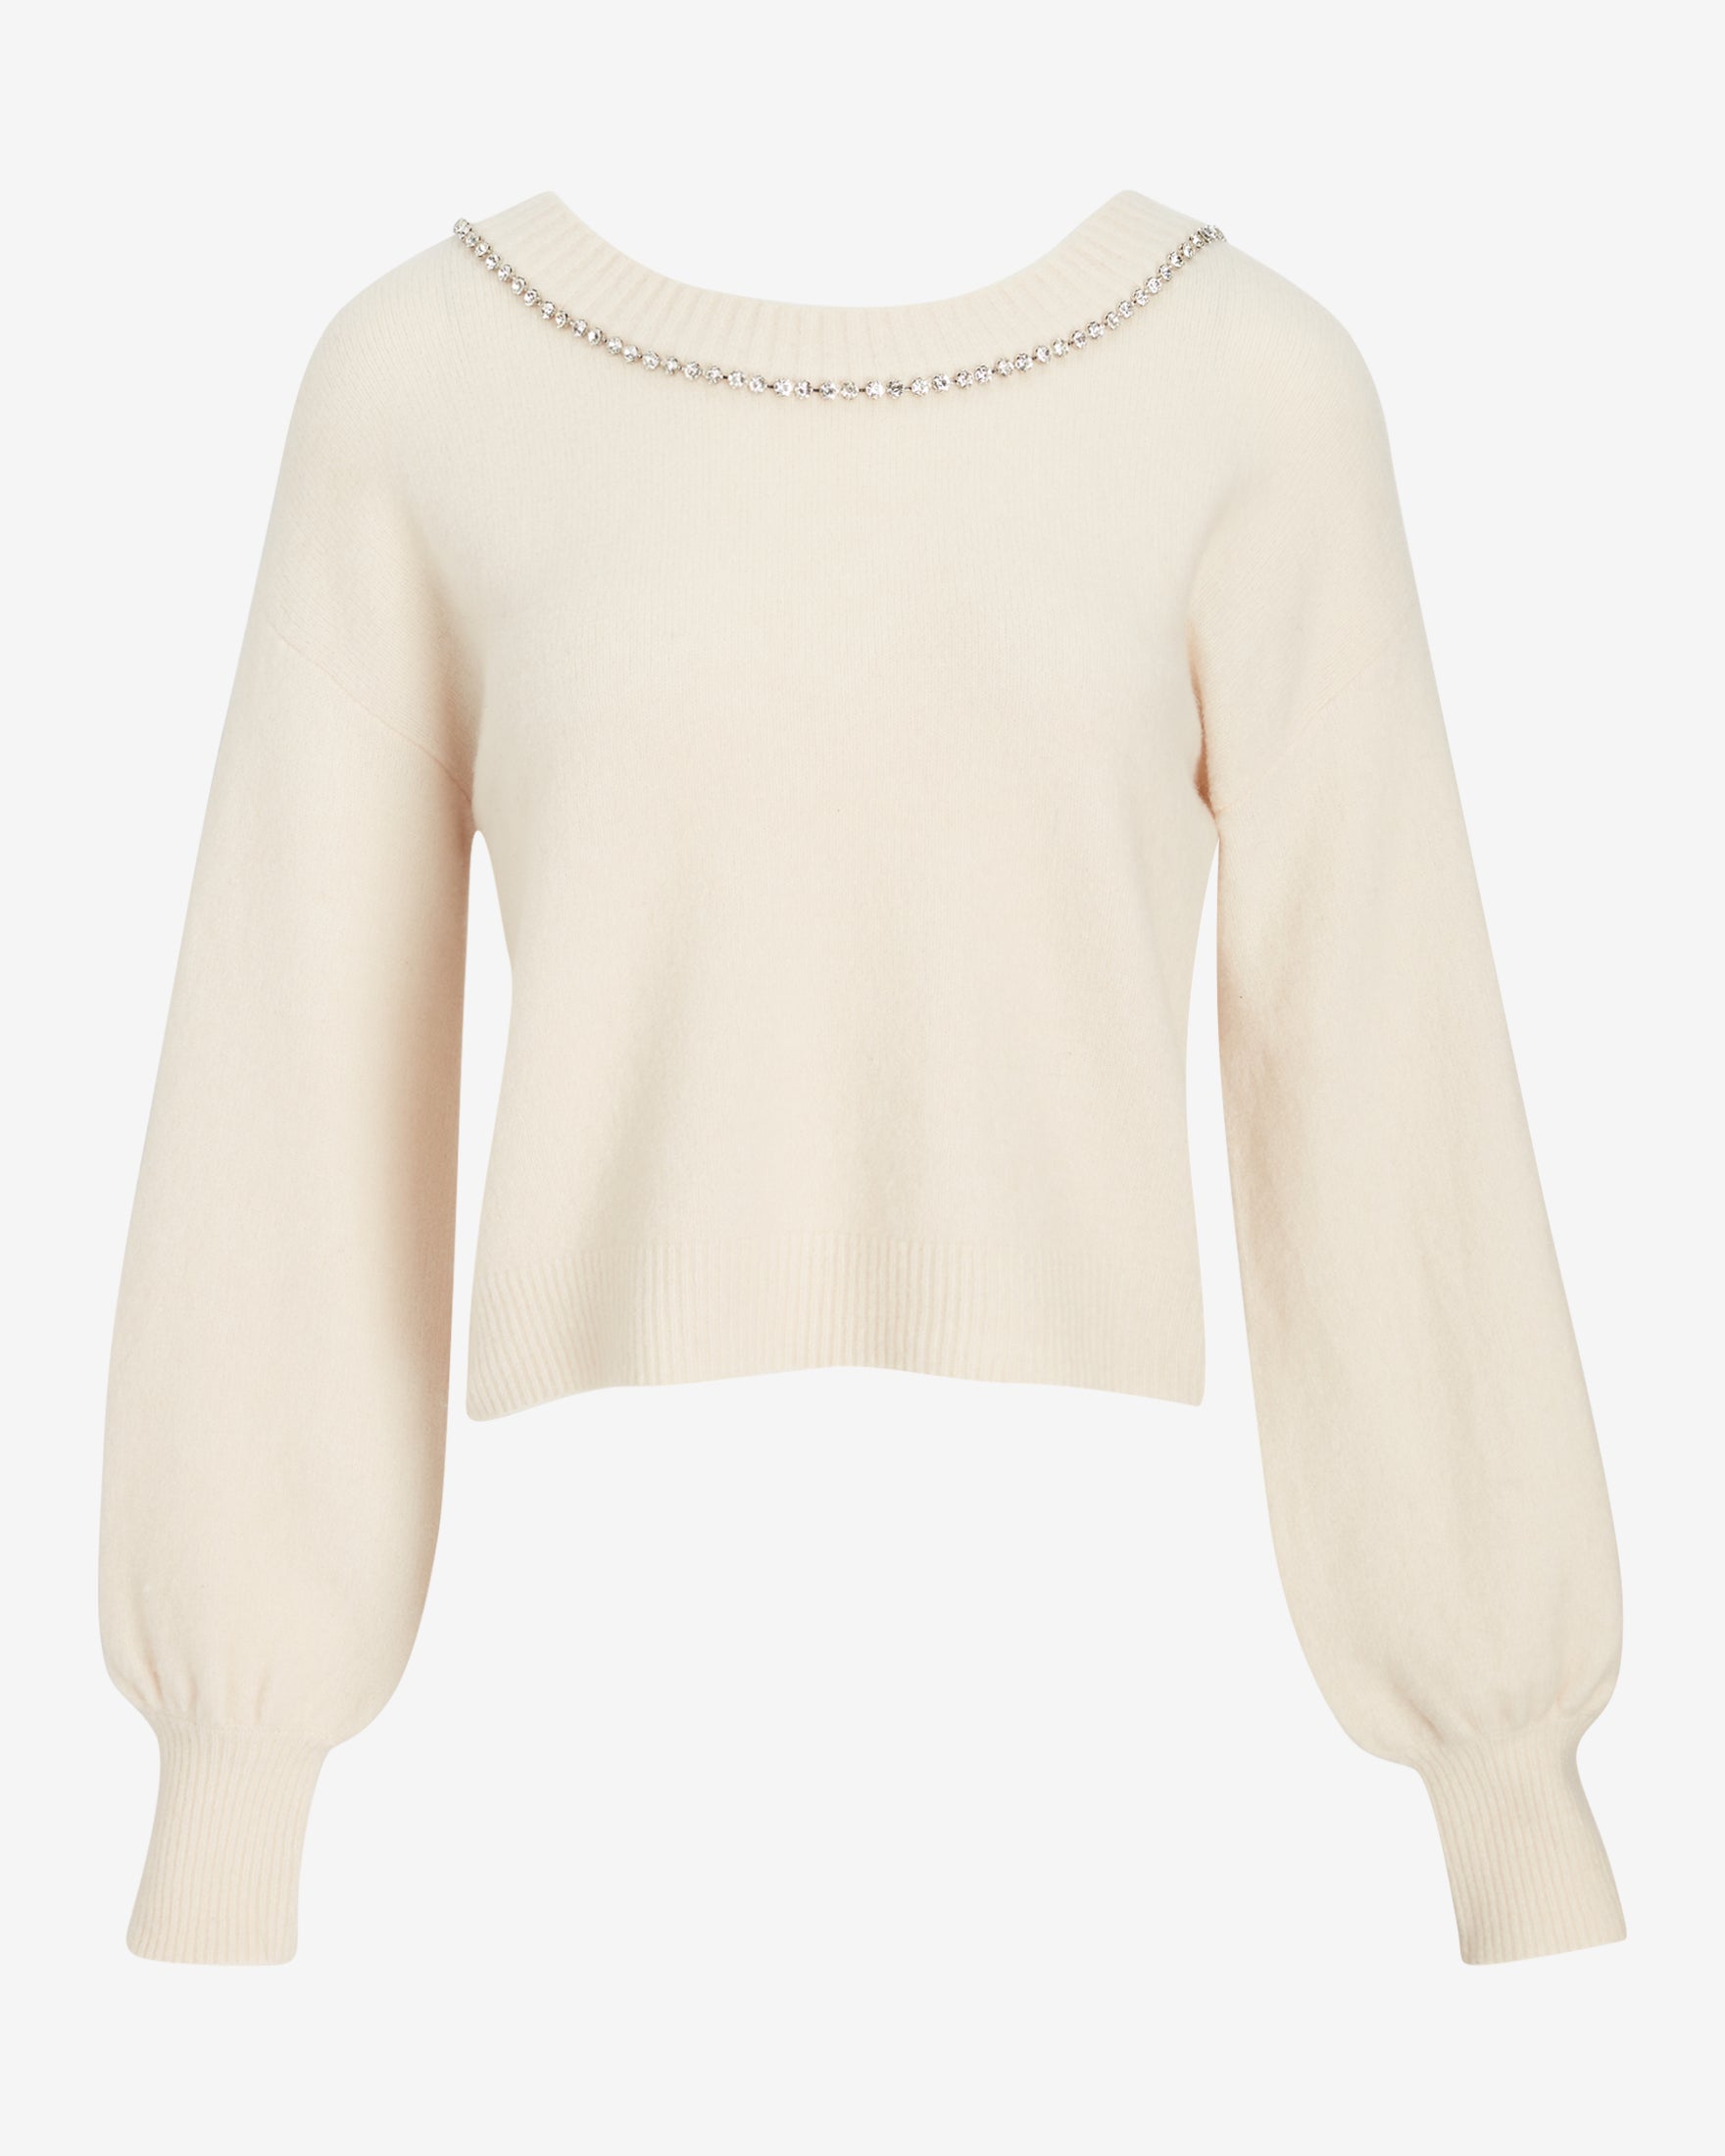 Cream-colored sweater with balloon sleeves and strip of diamond under neck